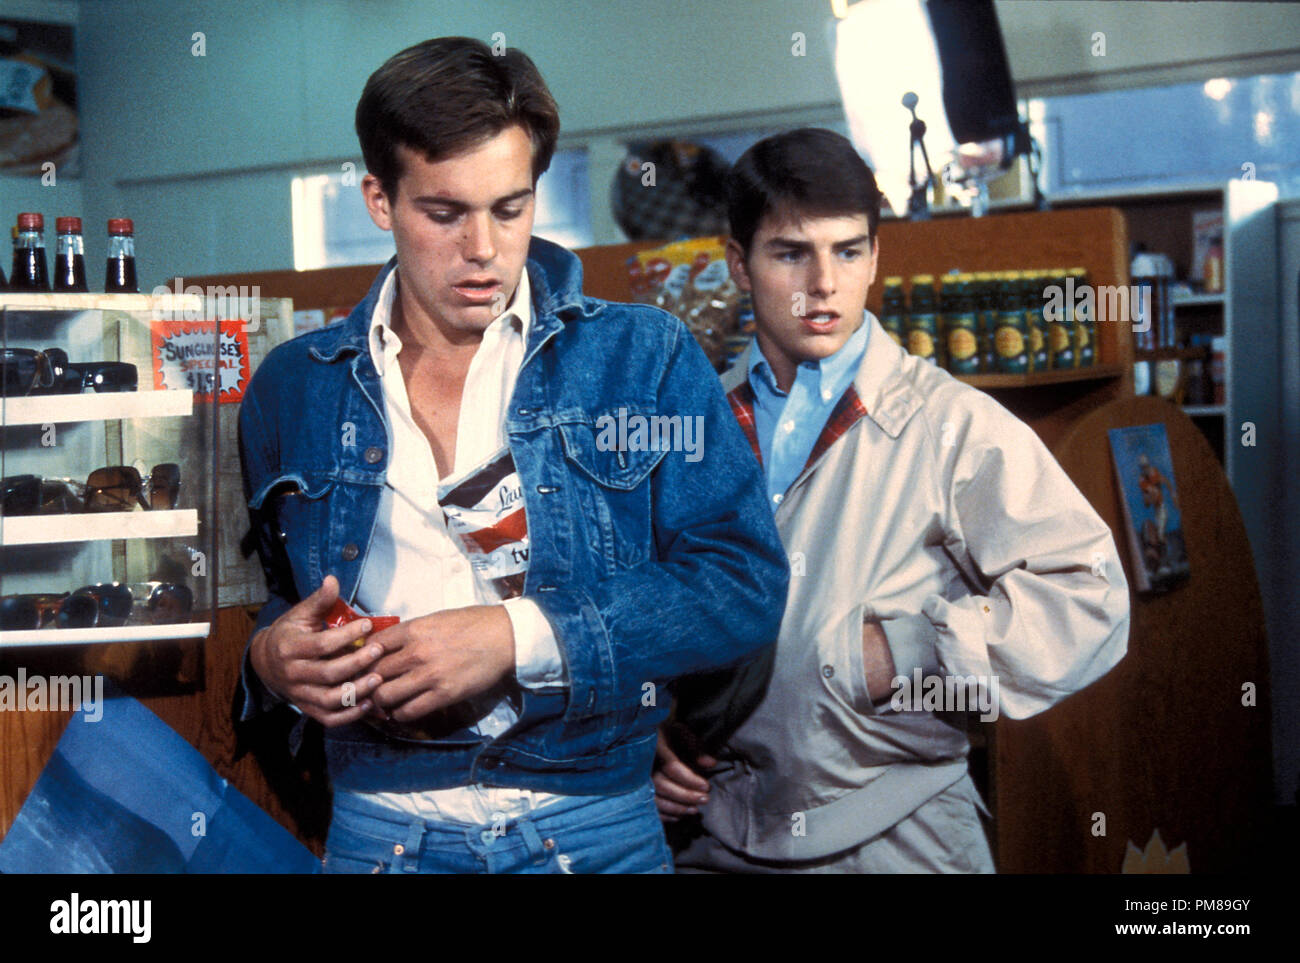 Studio Publicity Still from 'Losin' It' John Stockwell, Tom Cruise © 1983 Embassy Pictures   All Rights Reserved   File Reference # 31708200THA  For Editorial Use Only Stock Photo